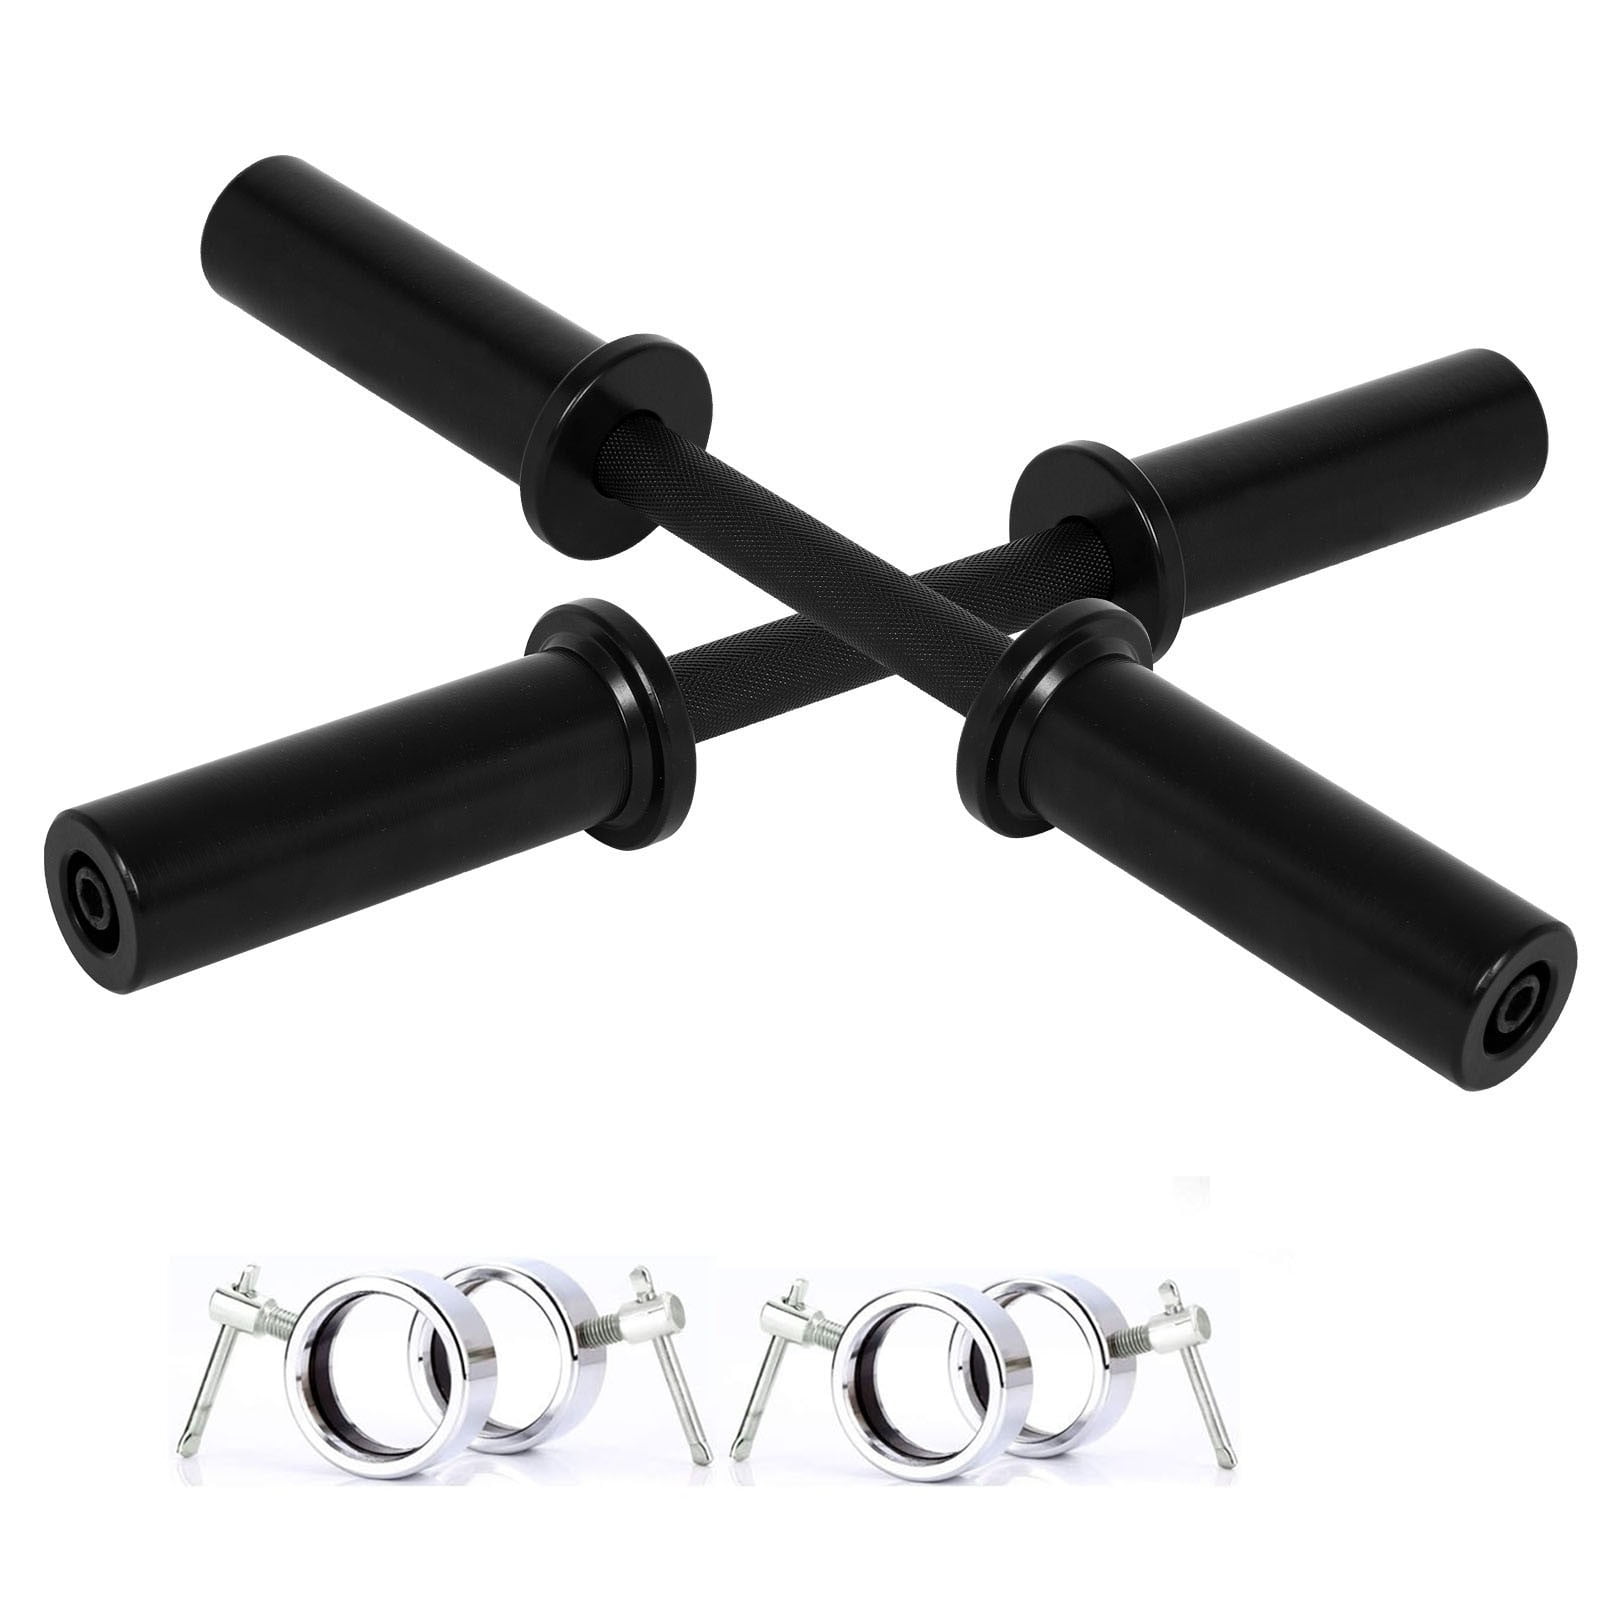 20” Olympic 2” Dumbbell Bars & Spring Collars Set Gym Weight Lifting Handles 